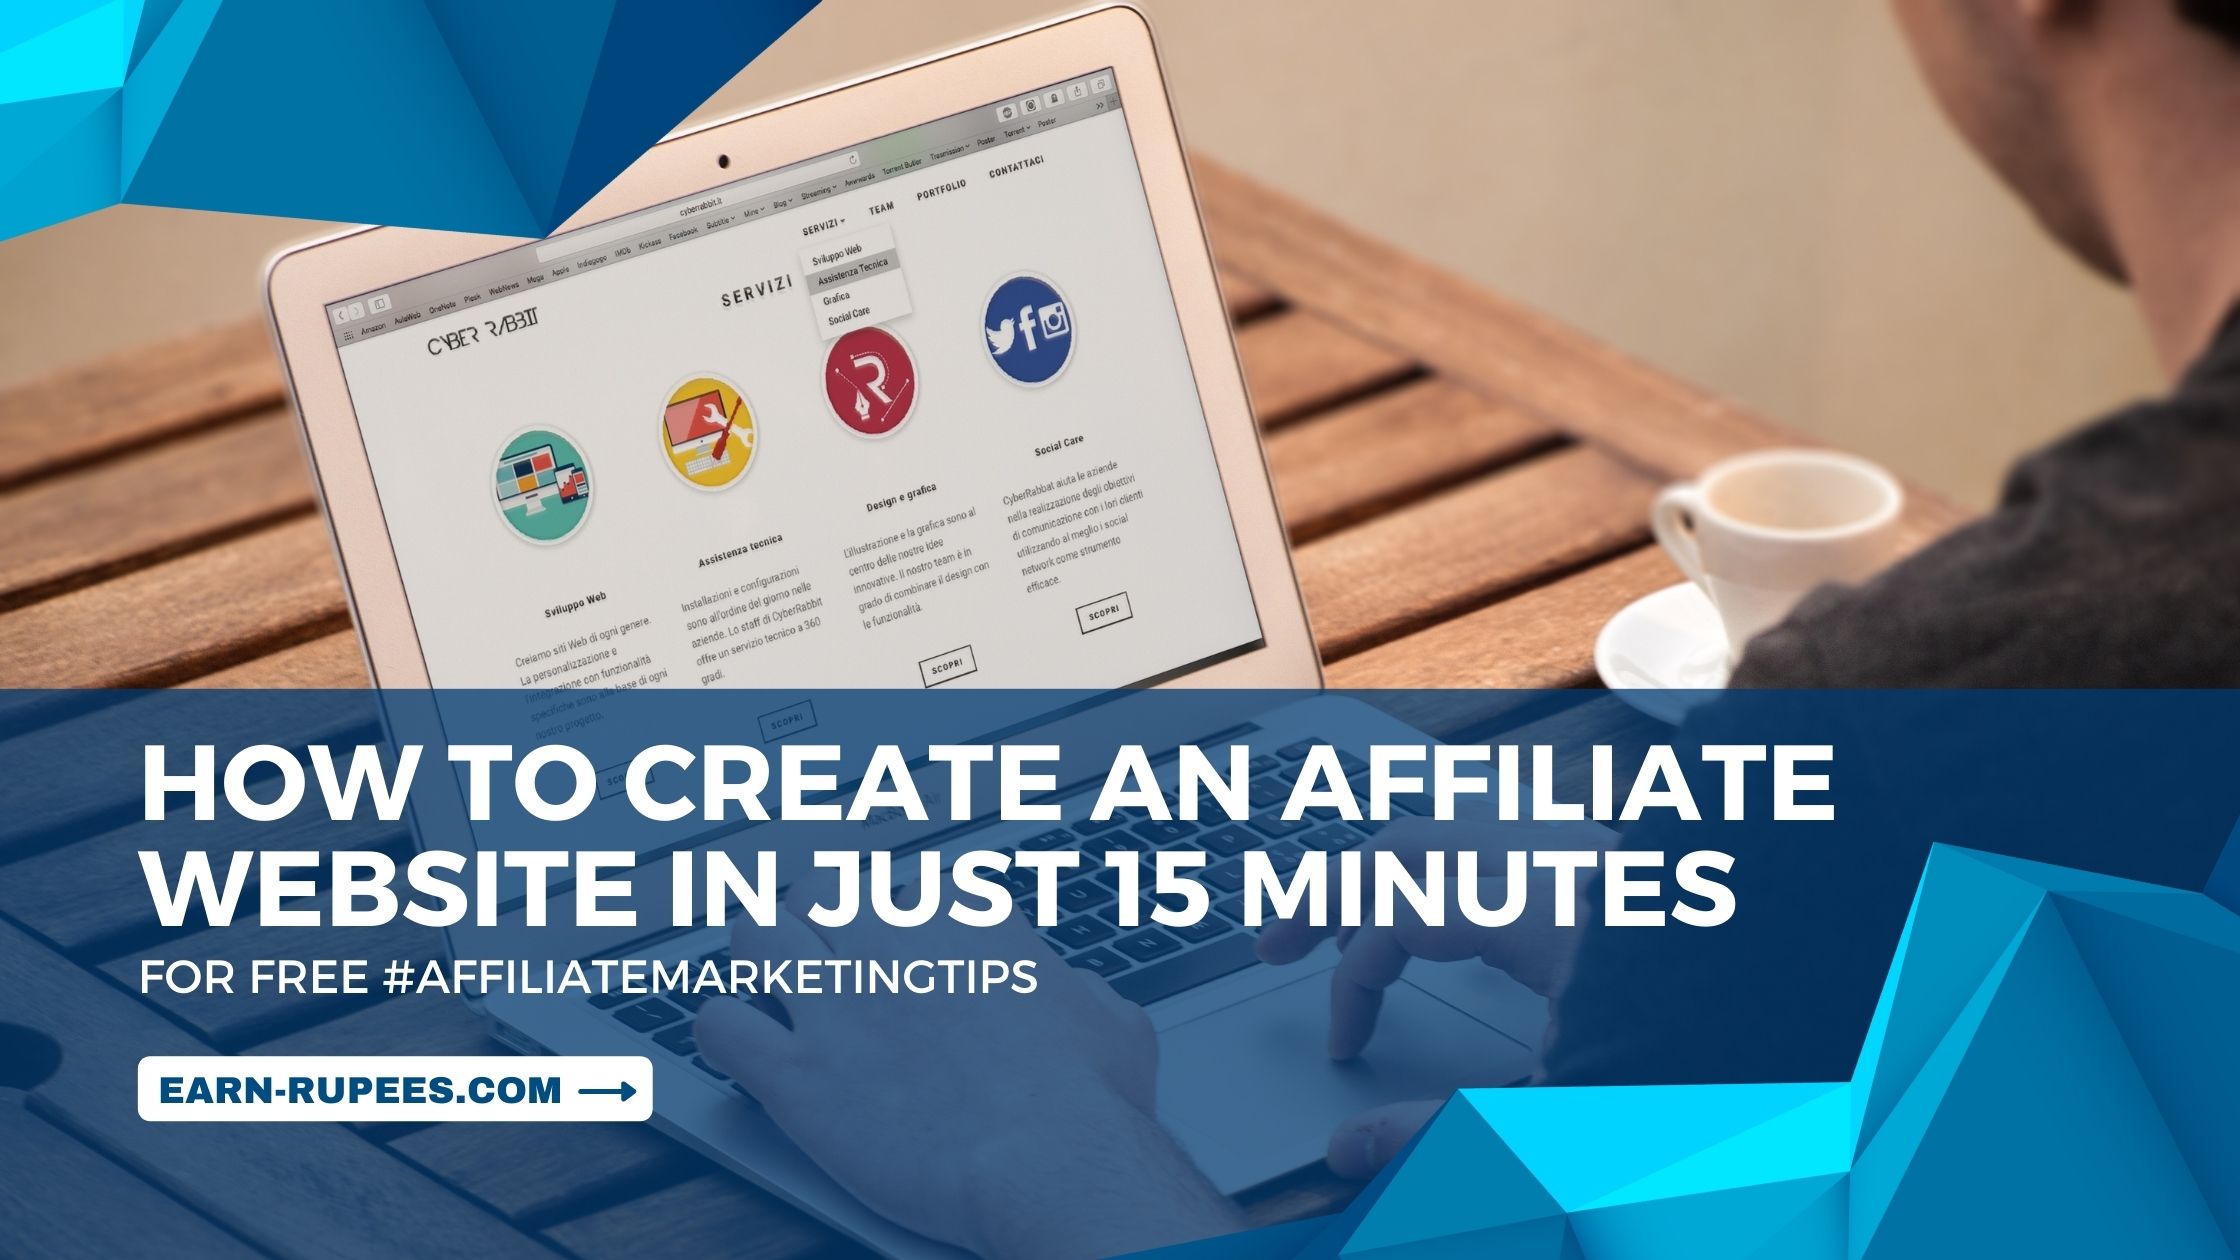 How-To-Create-an-Affiliate-Website-in-Just-15-Minutes